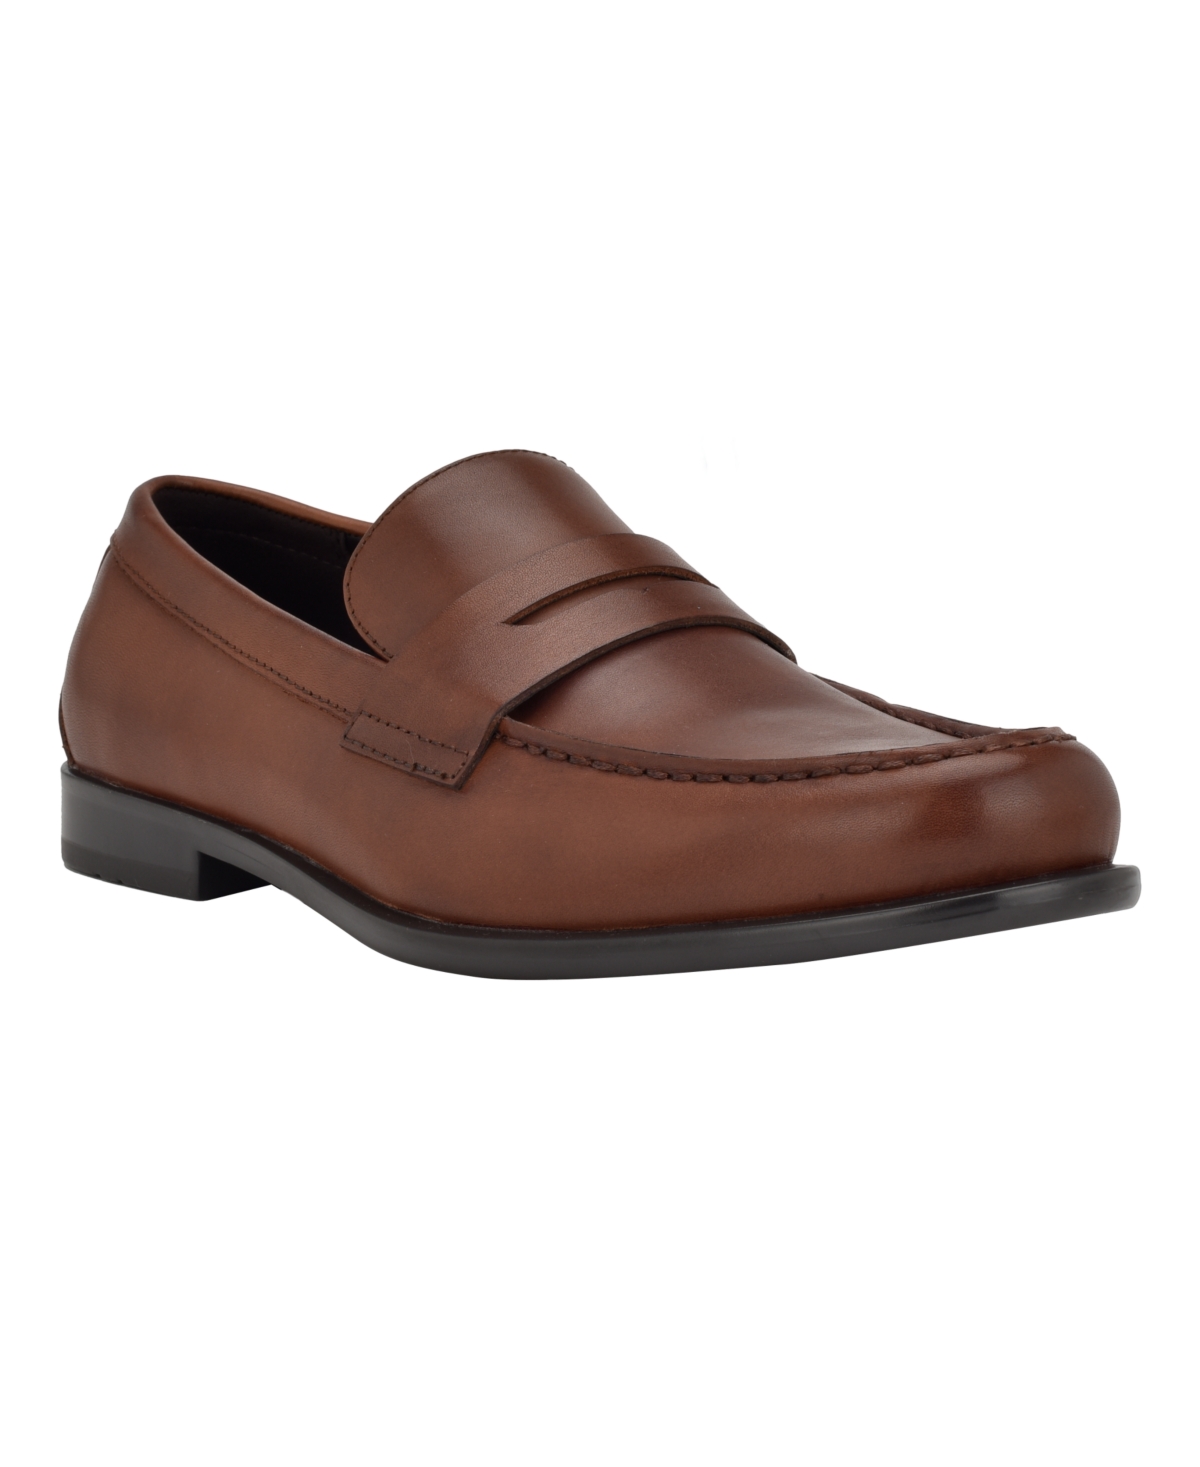 Calvin Klein Men's Jay Pointy Toe Slip-on Dress Loafers In Medium Brown Leather